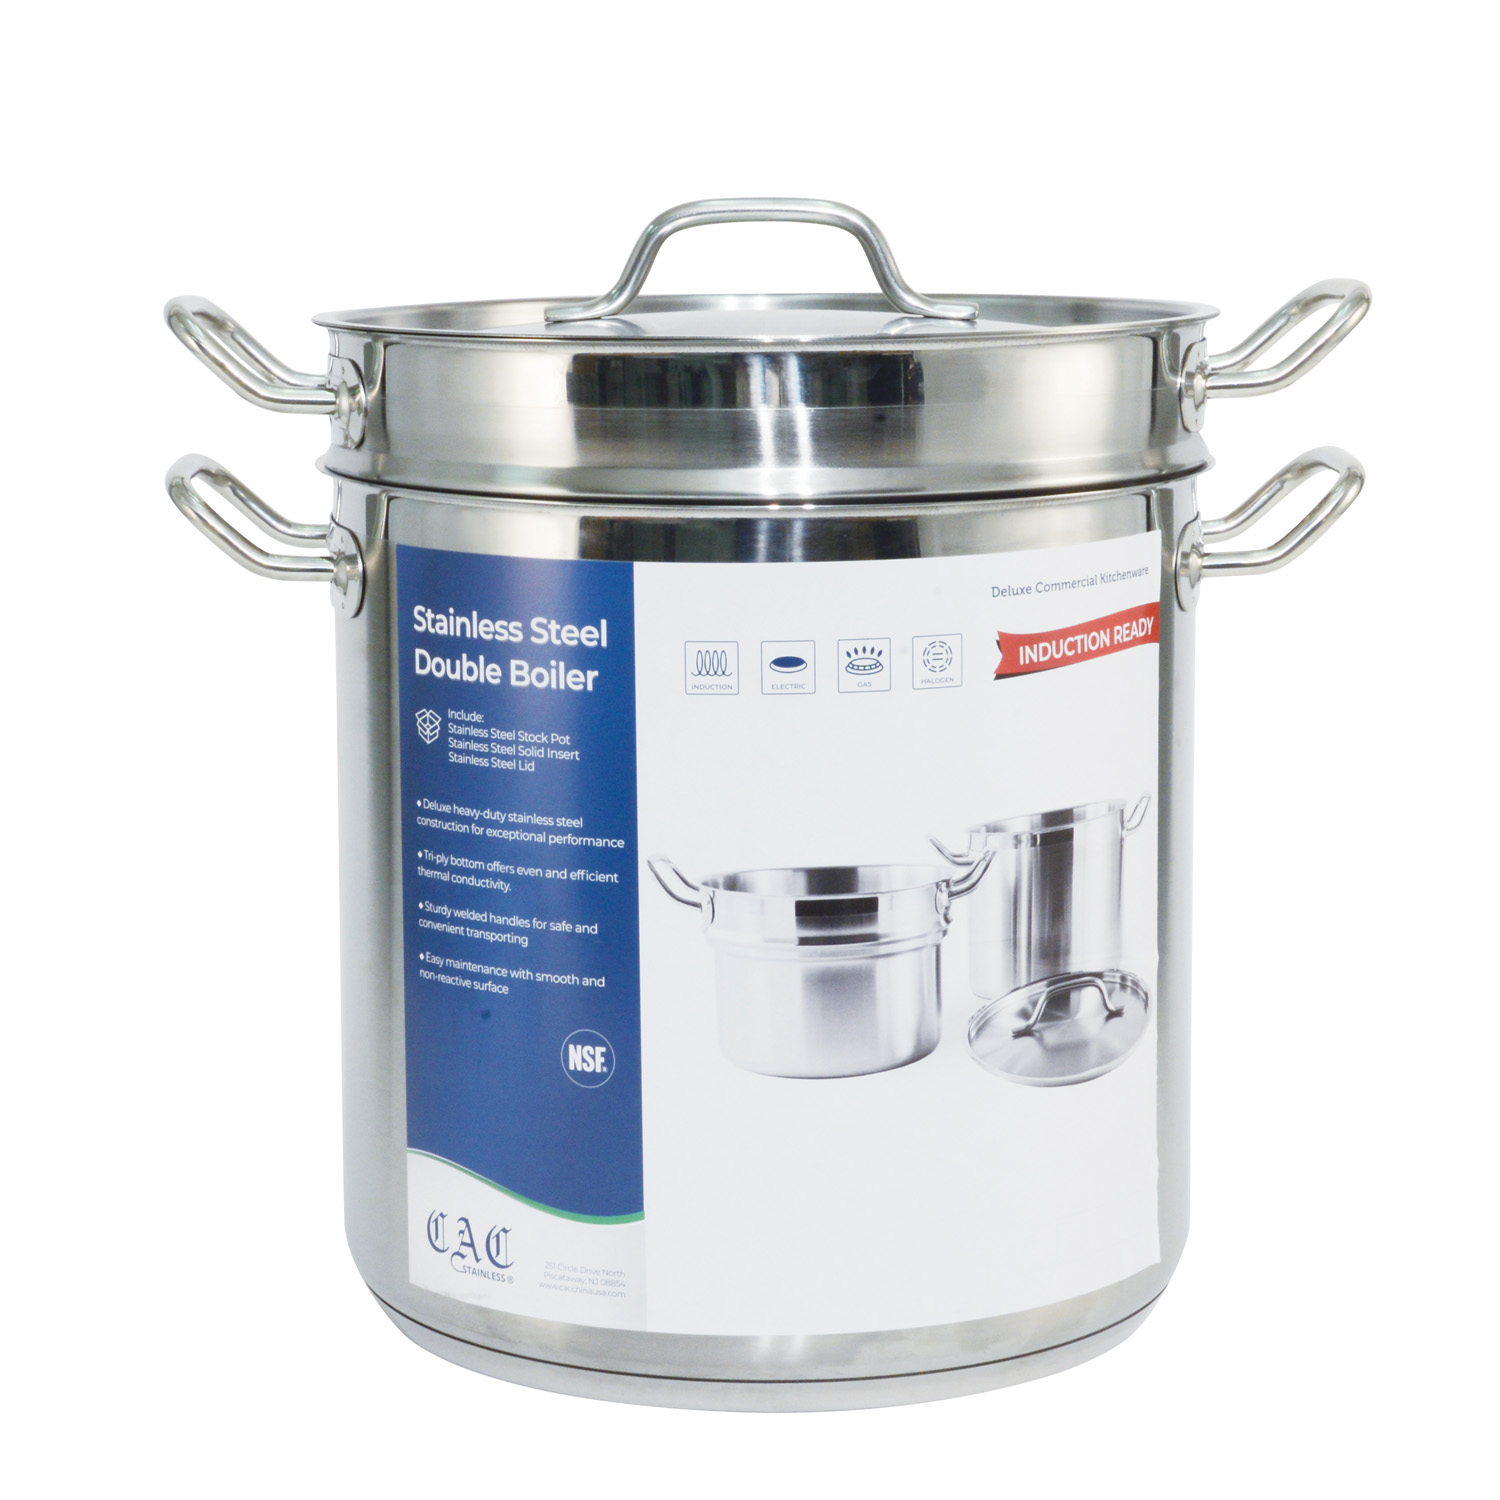 CAC China SPDB-20S Stainless Steel Double Boiler 20 Qt.